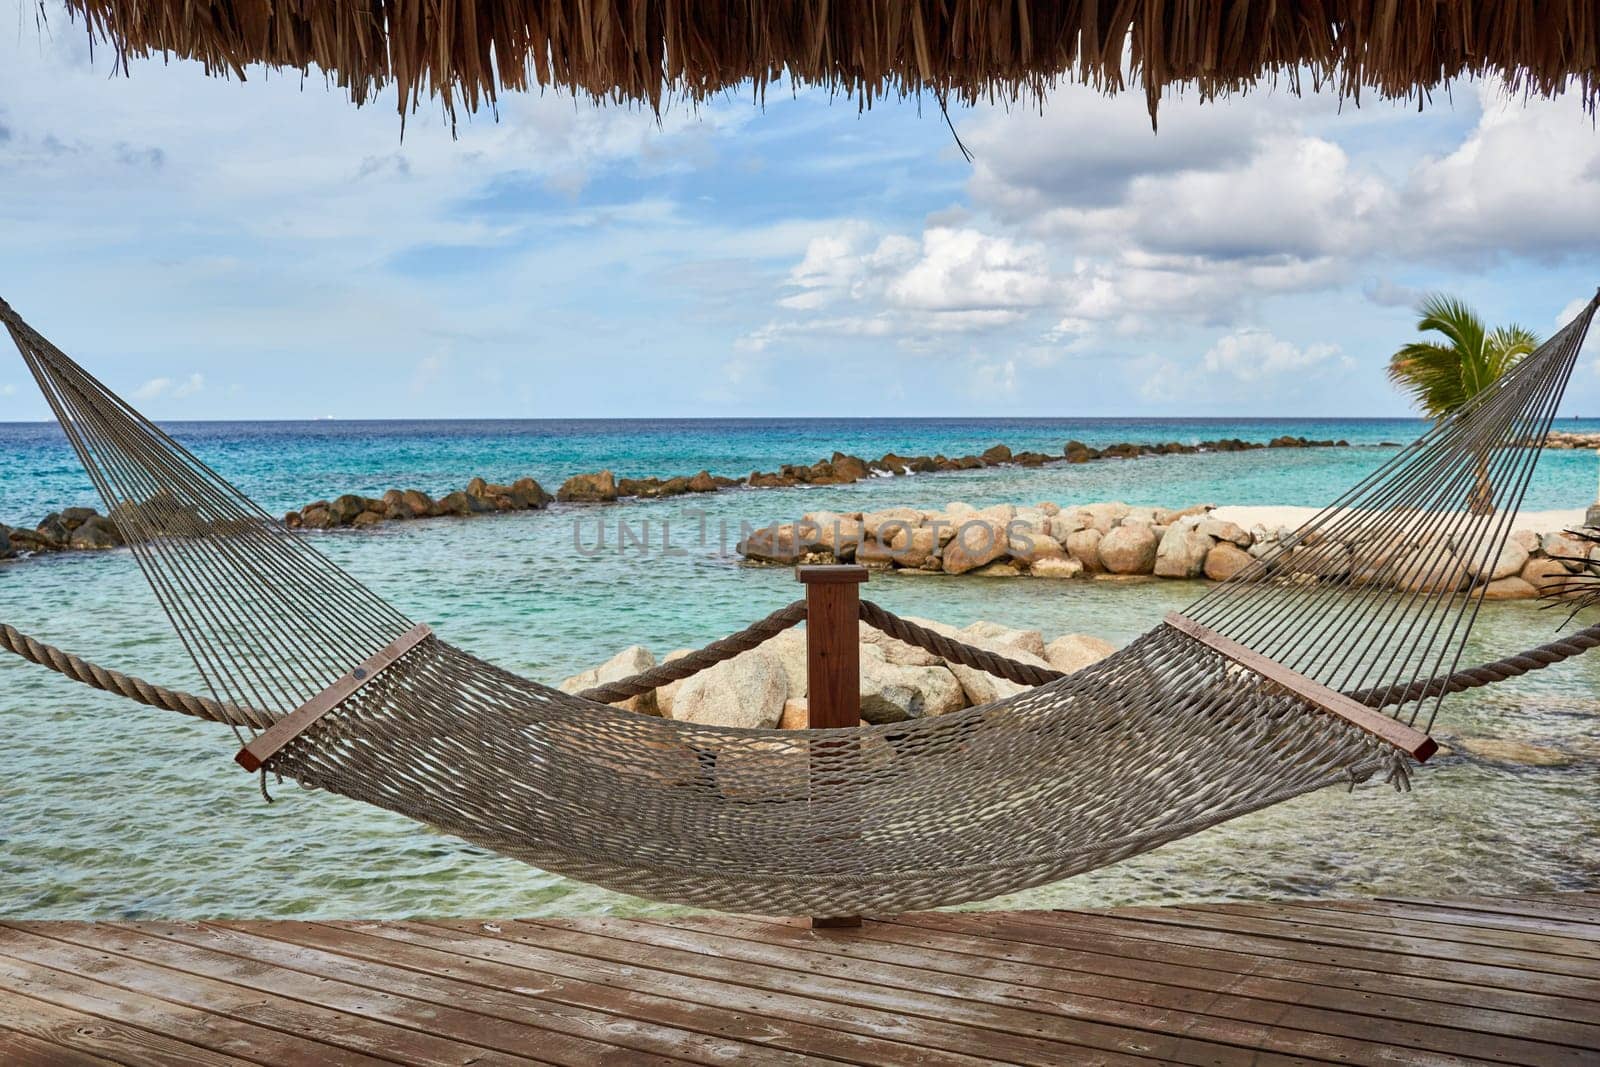 Hammock image for relaxation by DBibeault